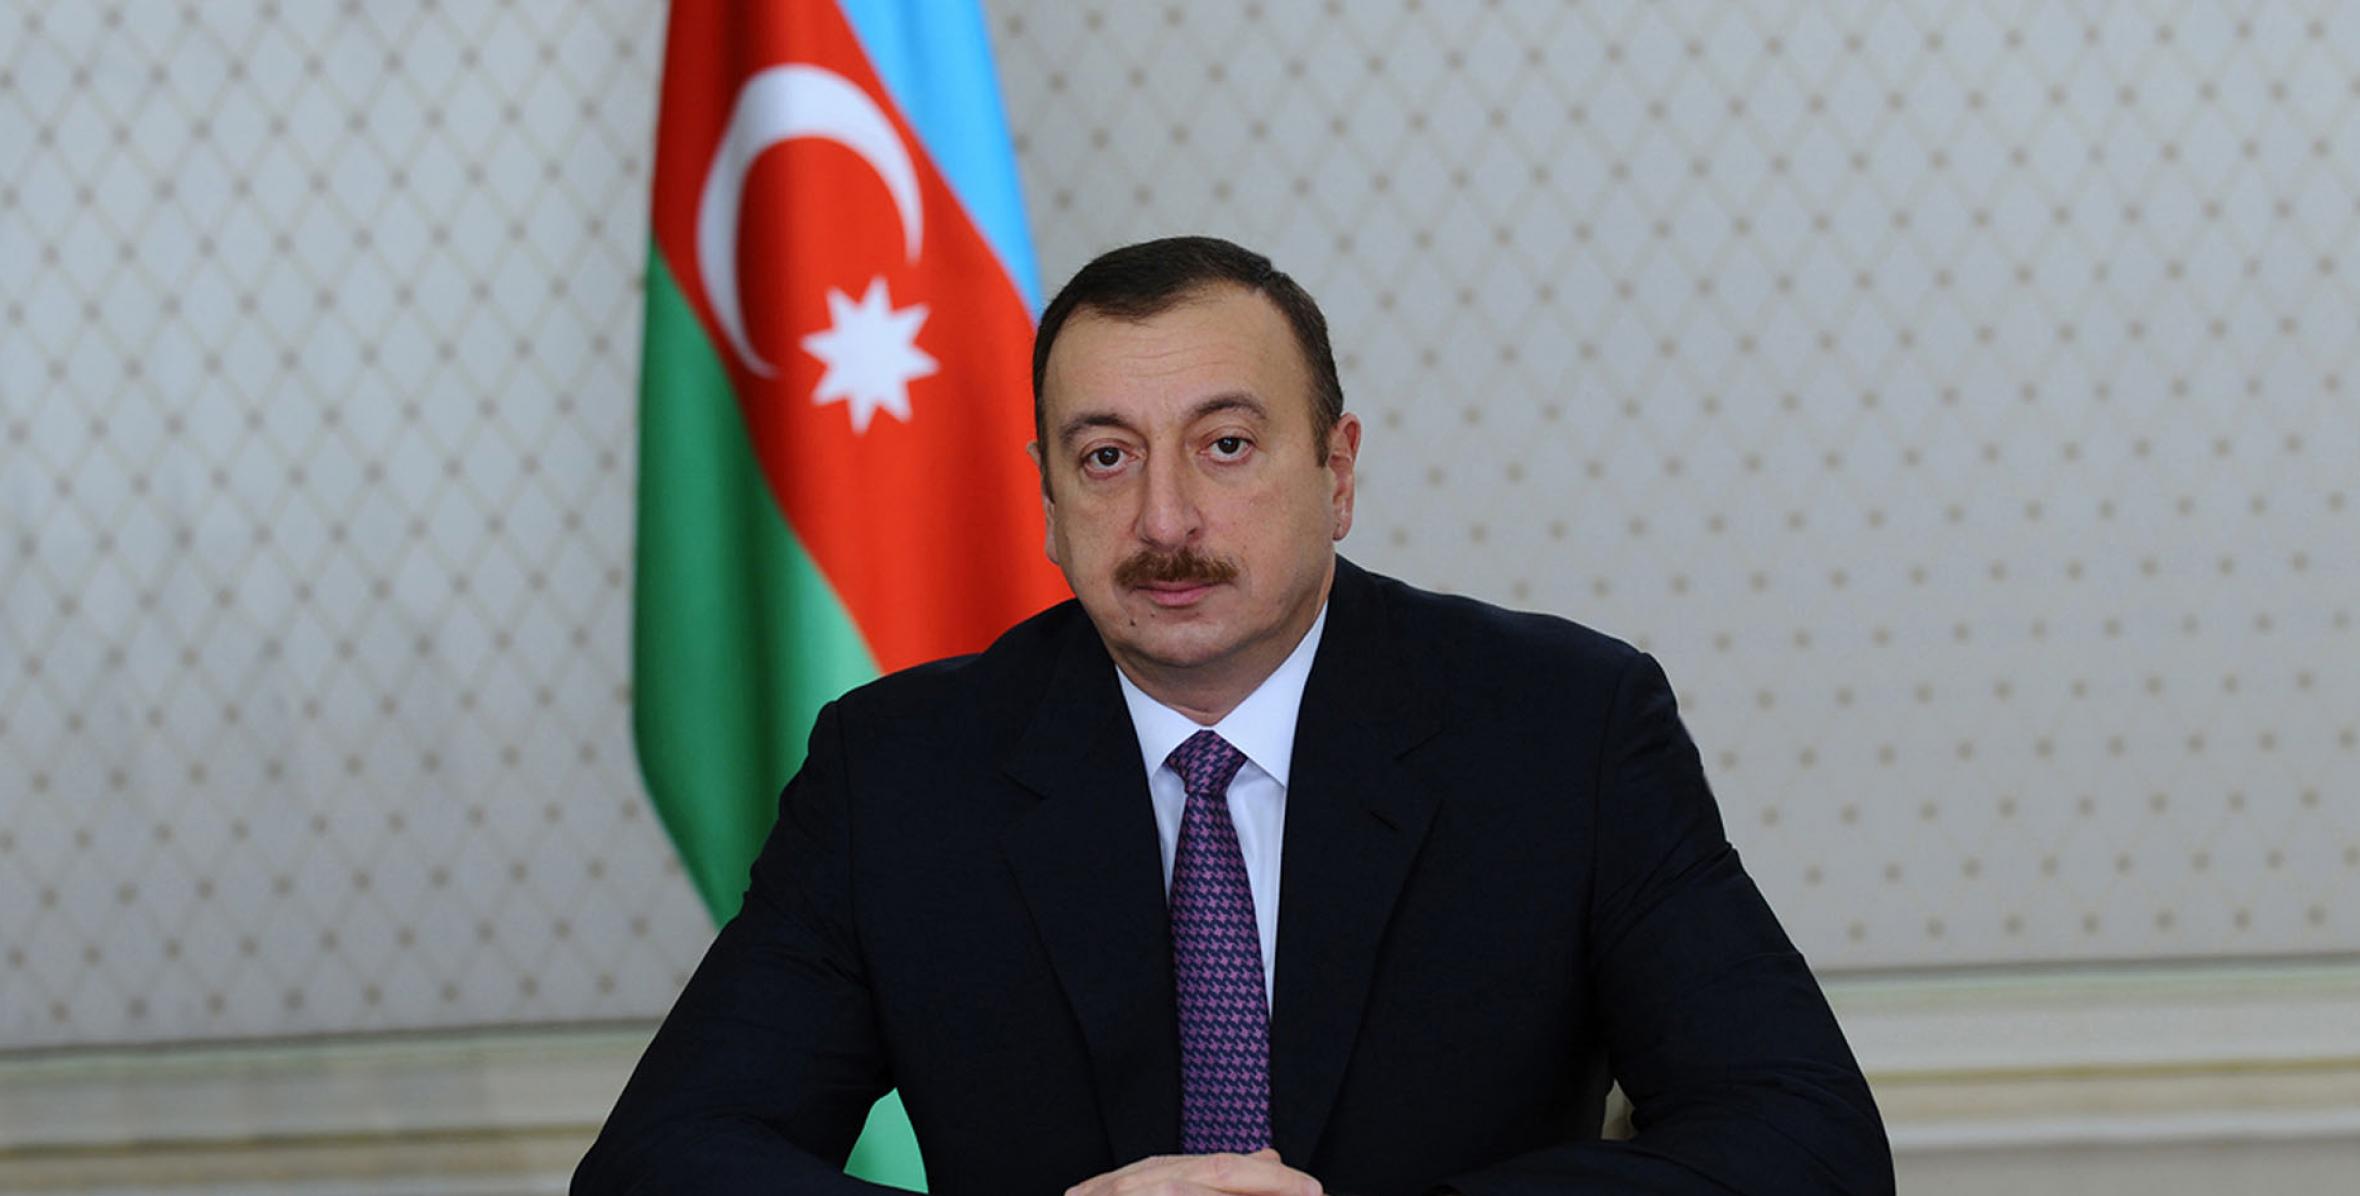 Ilham Aliyev was interviewed by the Islamic Republic of Iran Broadcasting